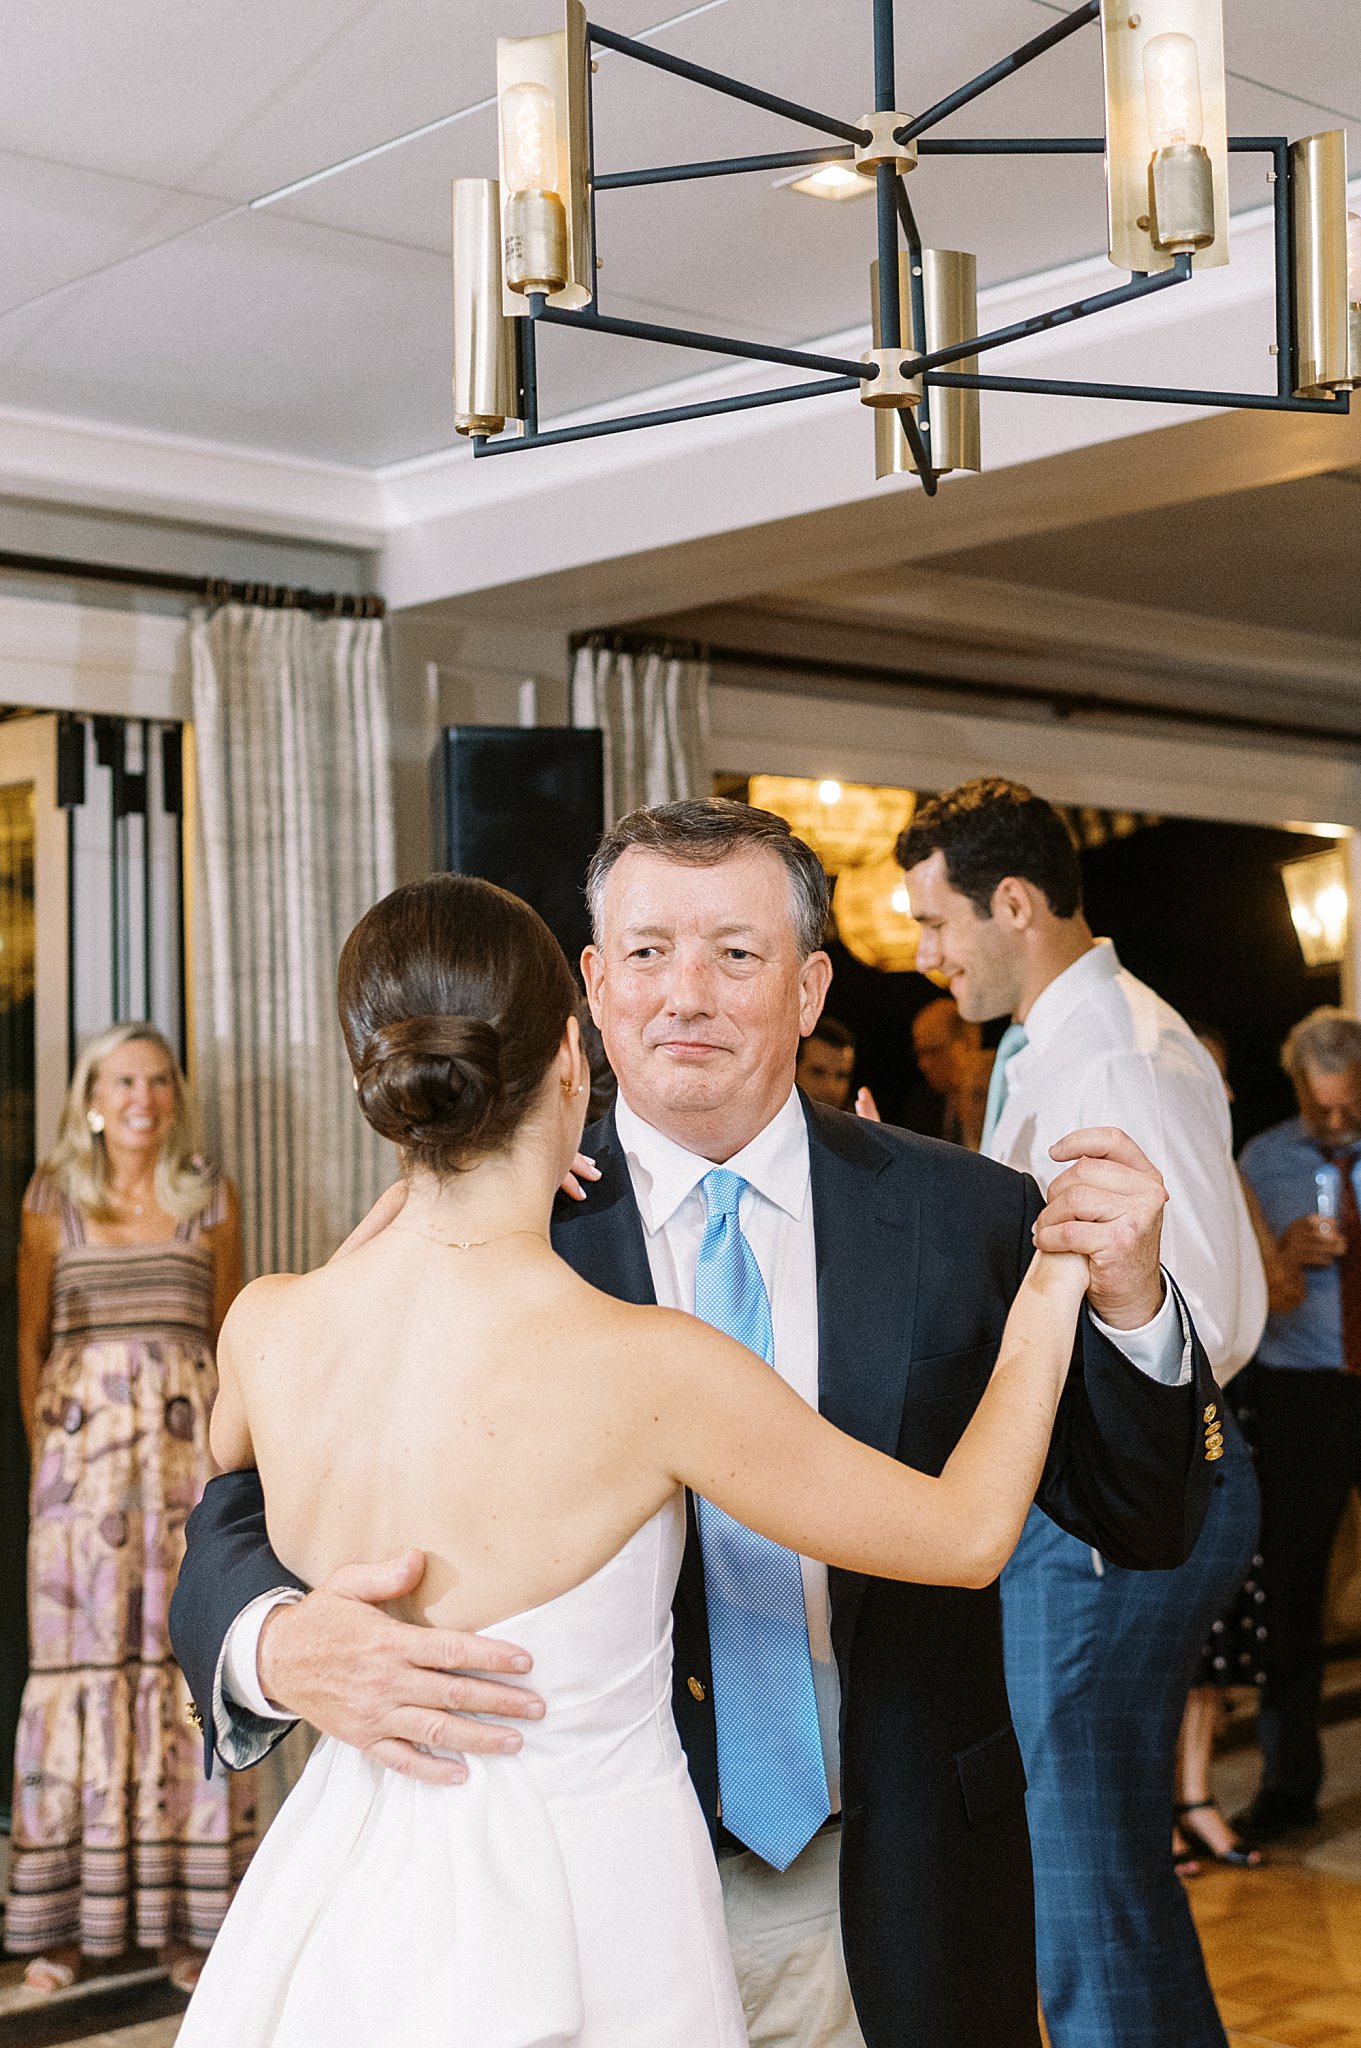 father of the bride dances with his daughter at reception by Lynne Reznick Photography 